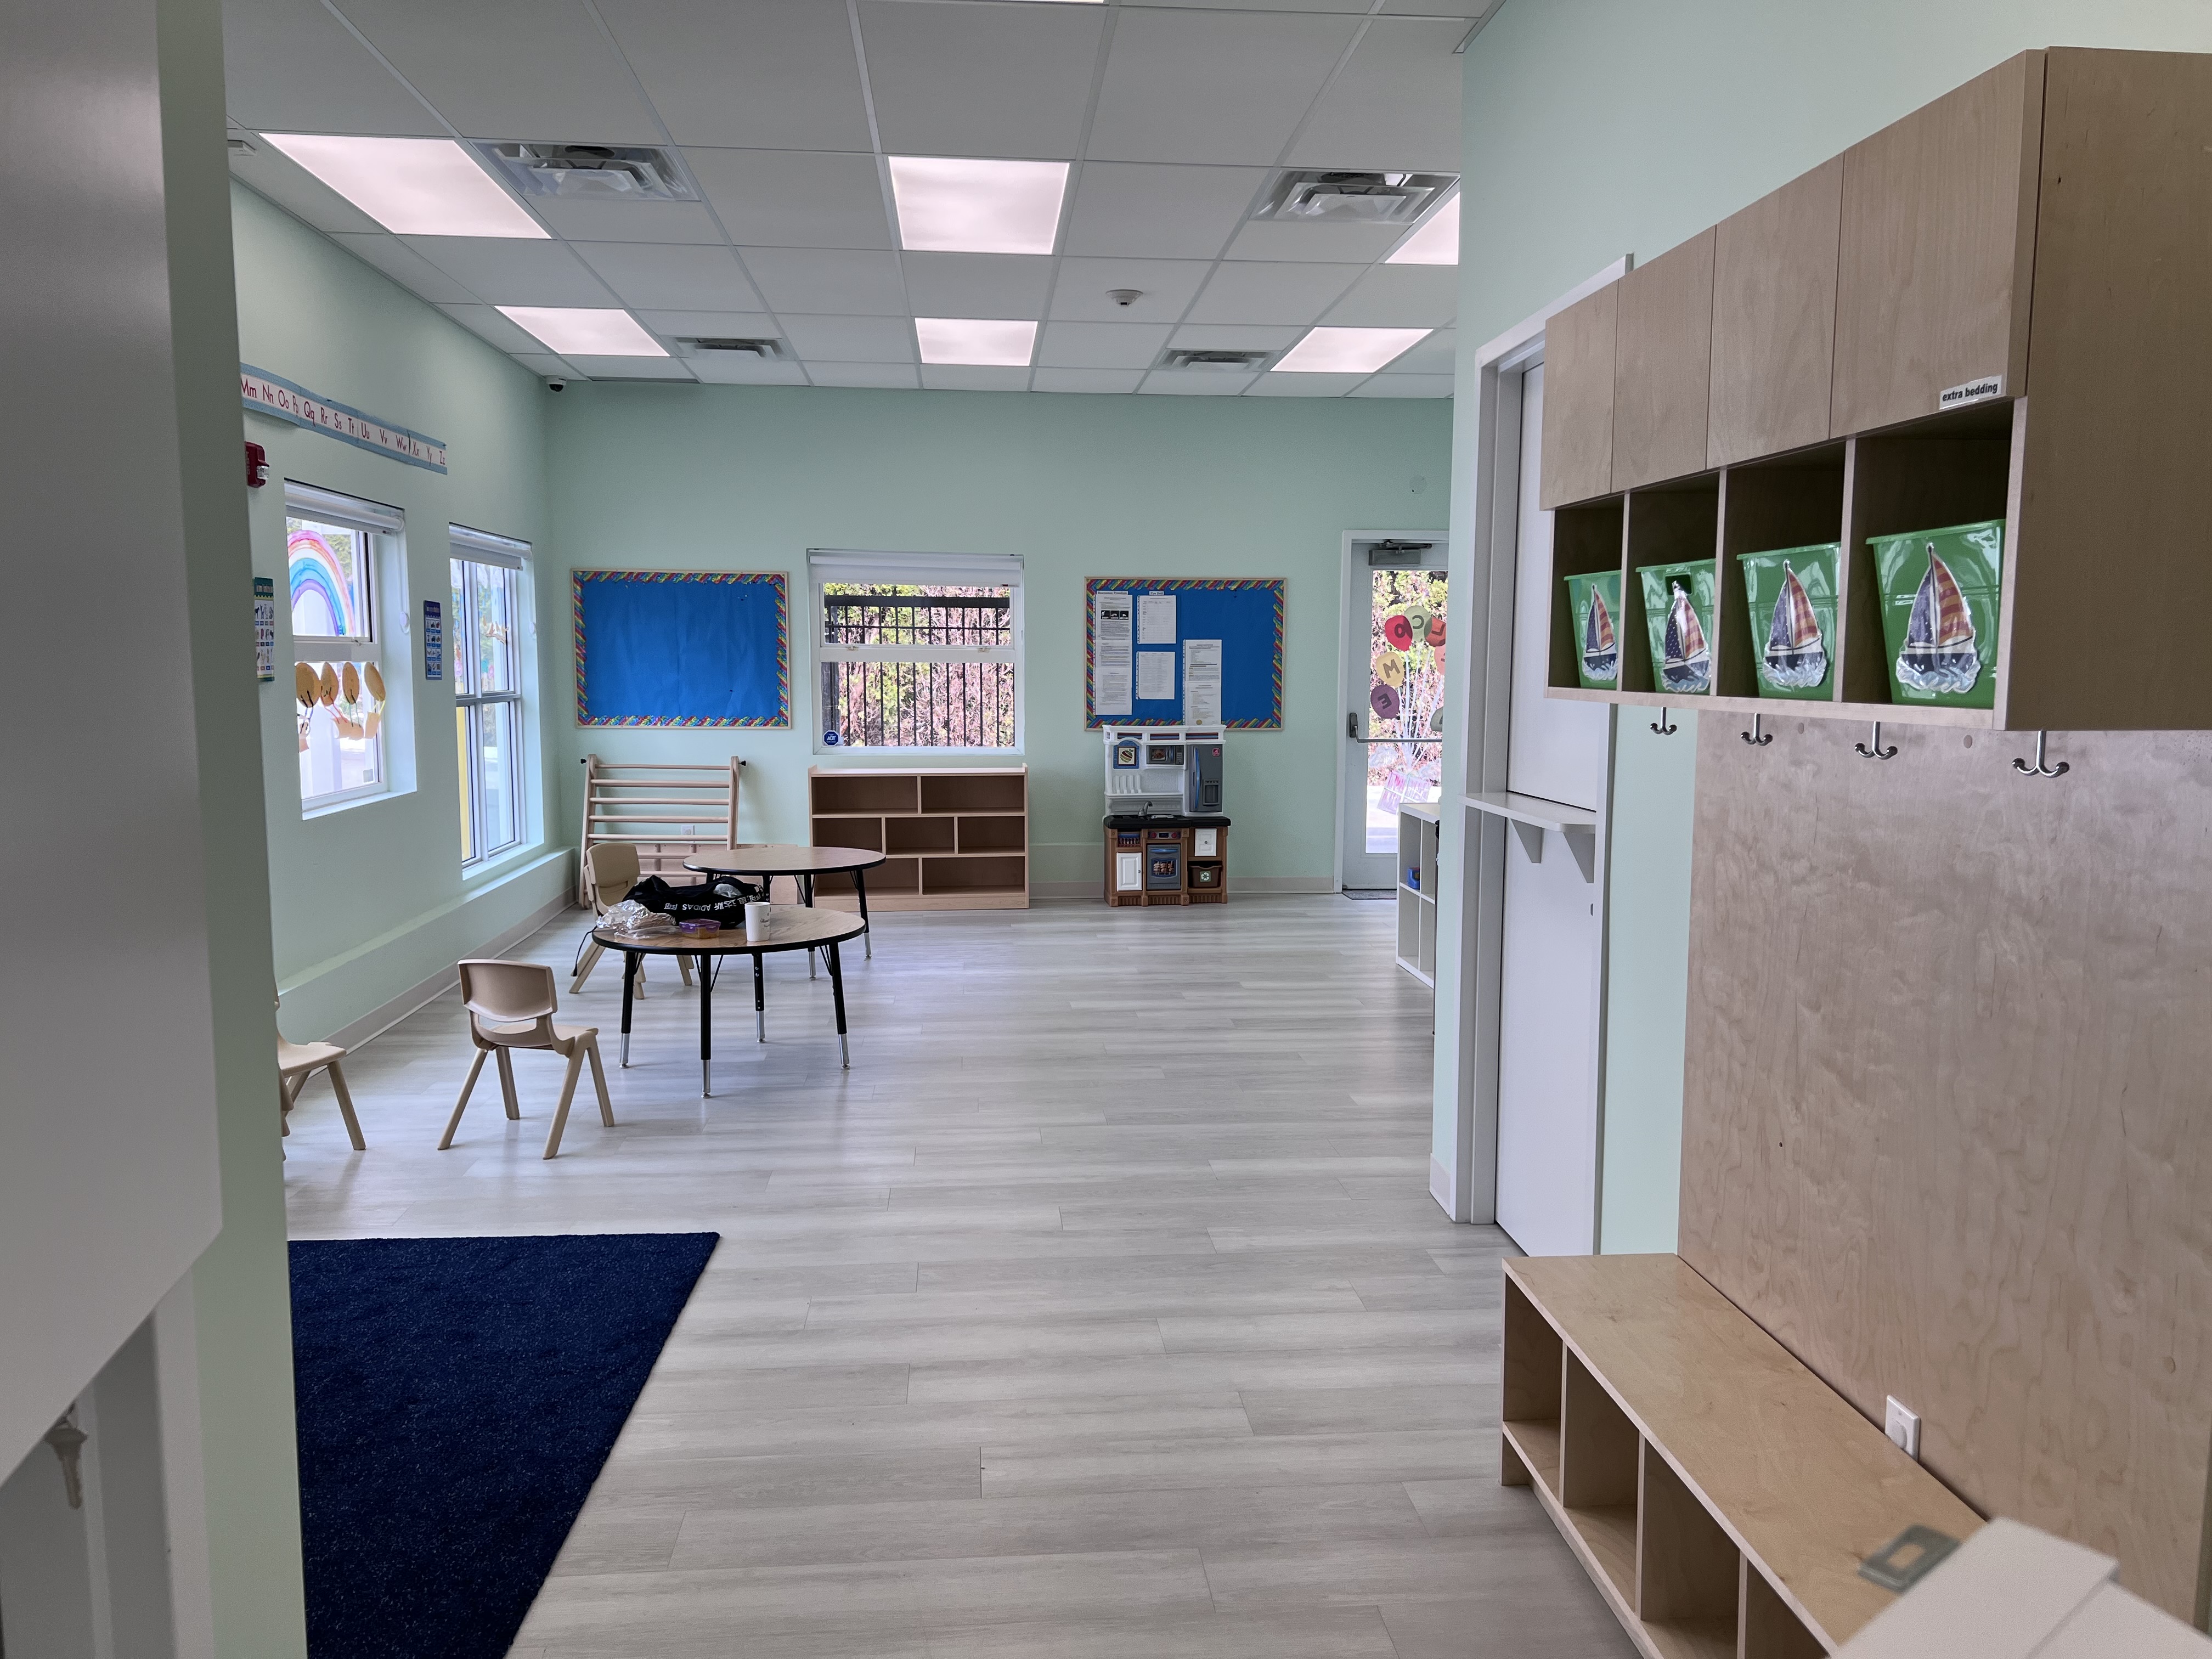 Local Childcare Buildings In Surrey And Vancouver